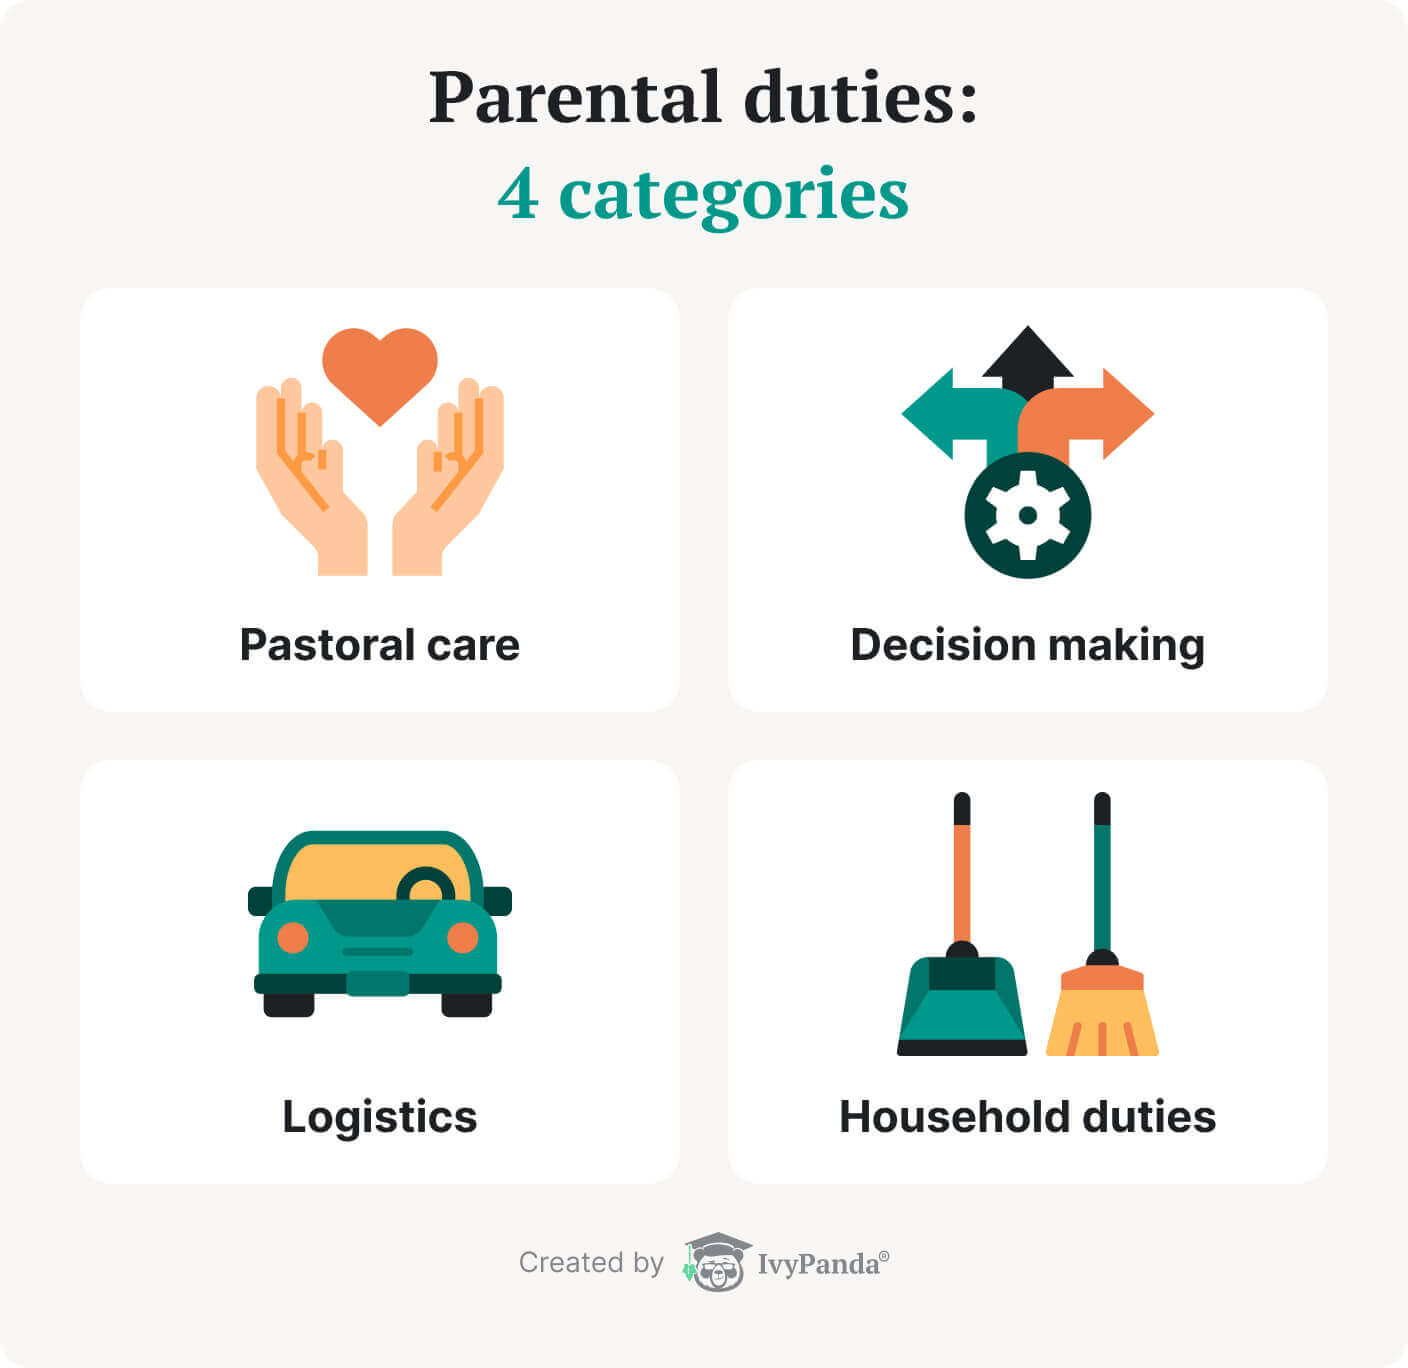 The picture lists 4 groups of parental duties.